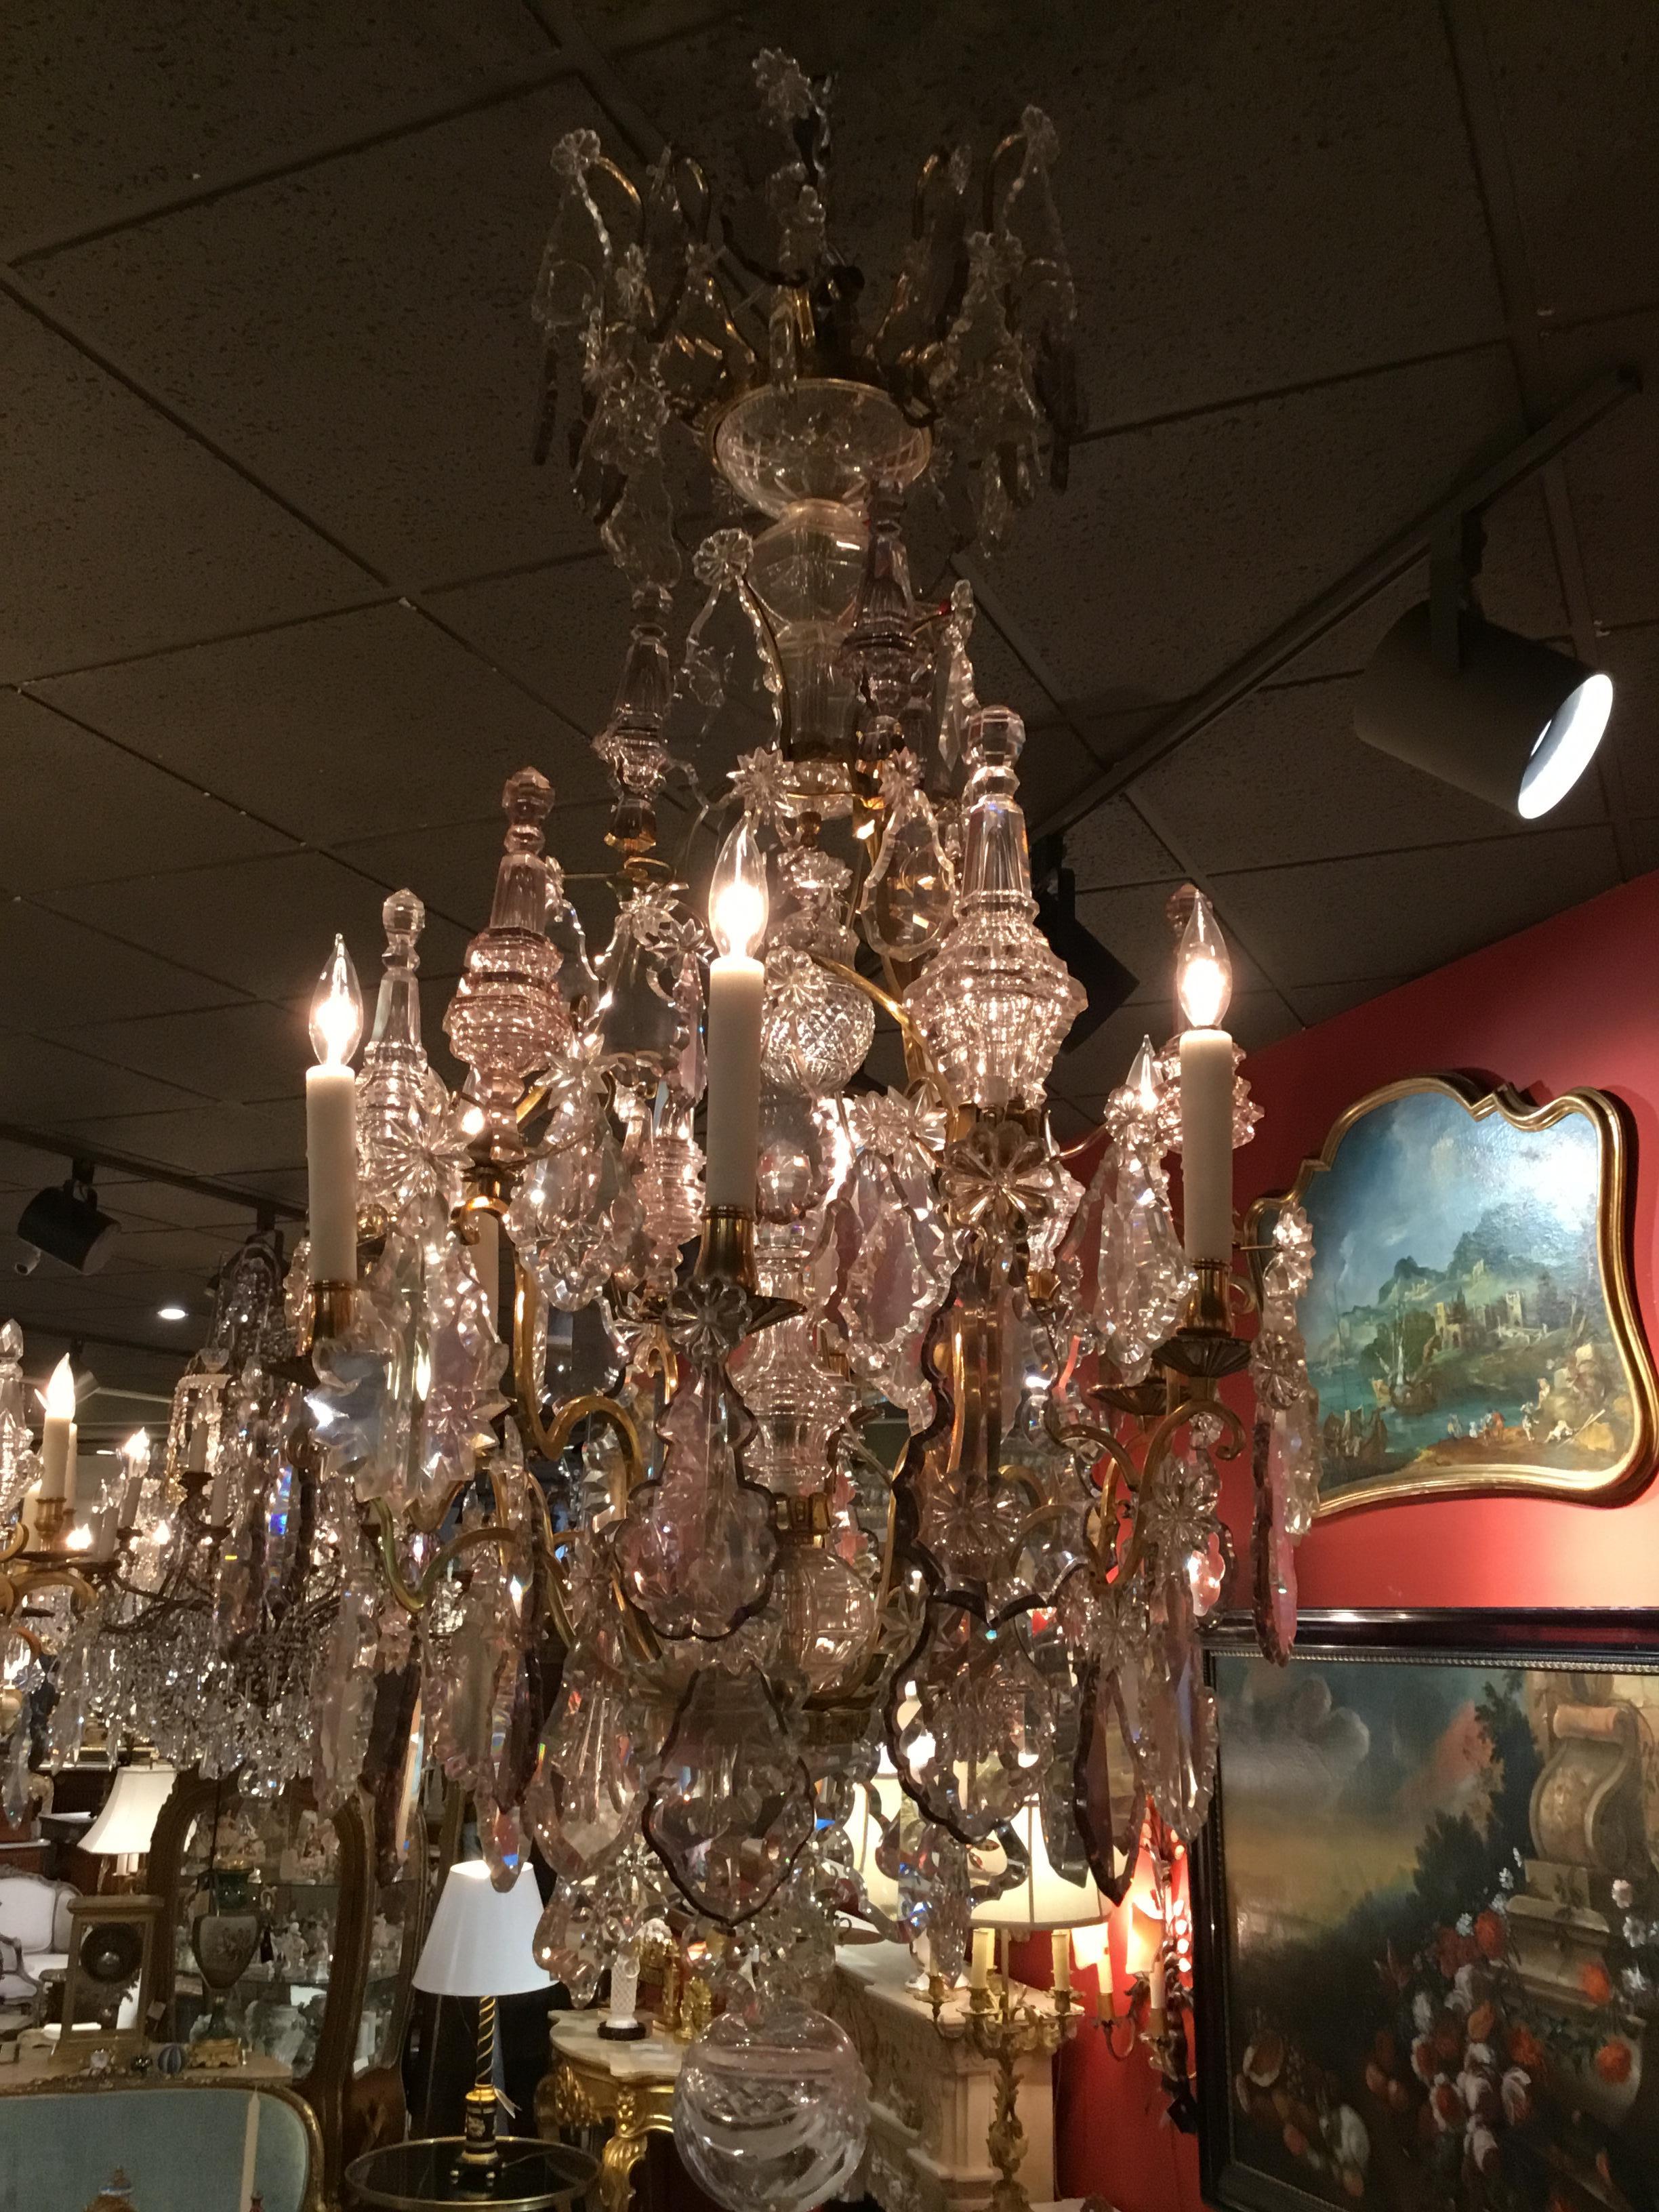 Exceptional French chandelier in the Versailles style with gilt bronze
Scrolling arms and very large crystals in clear and alternating light smokey
topaz colors. Large finials of crystal surround the perimeter of this
beautiful chandelier.

   